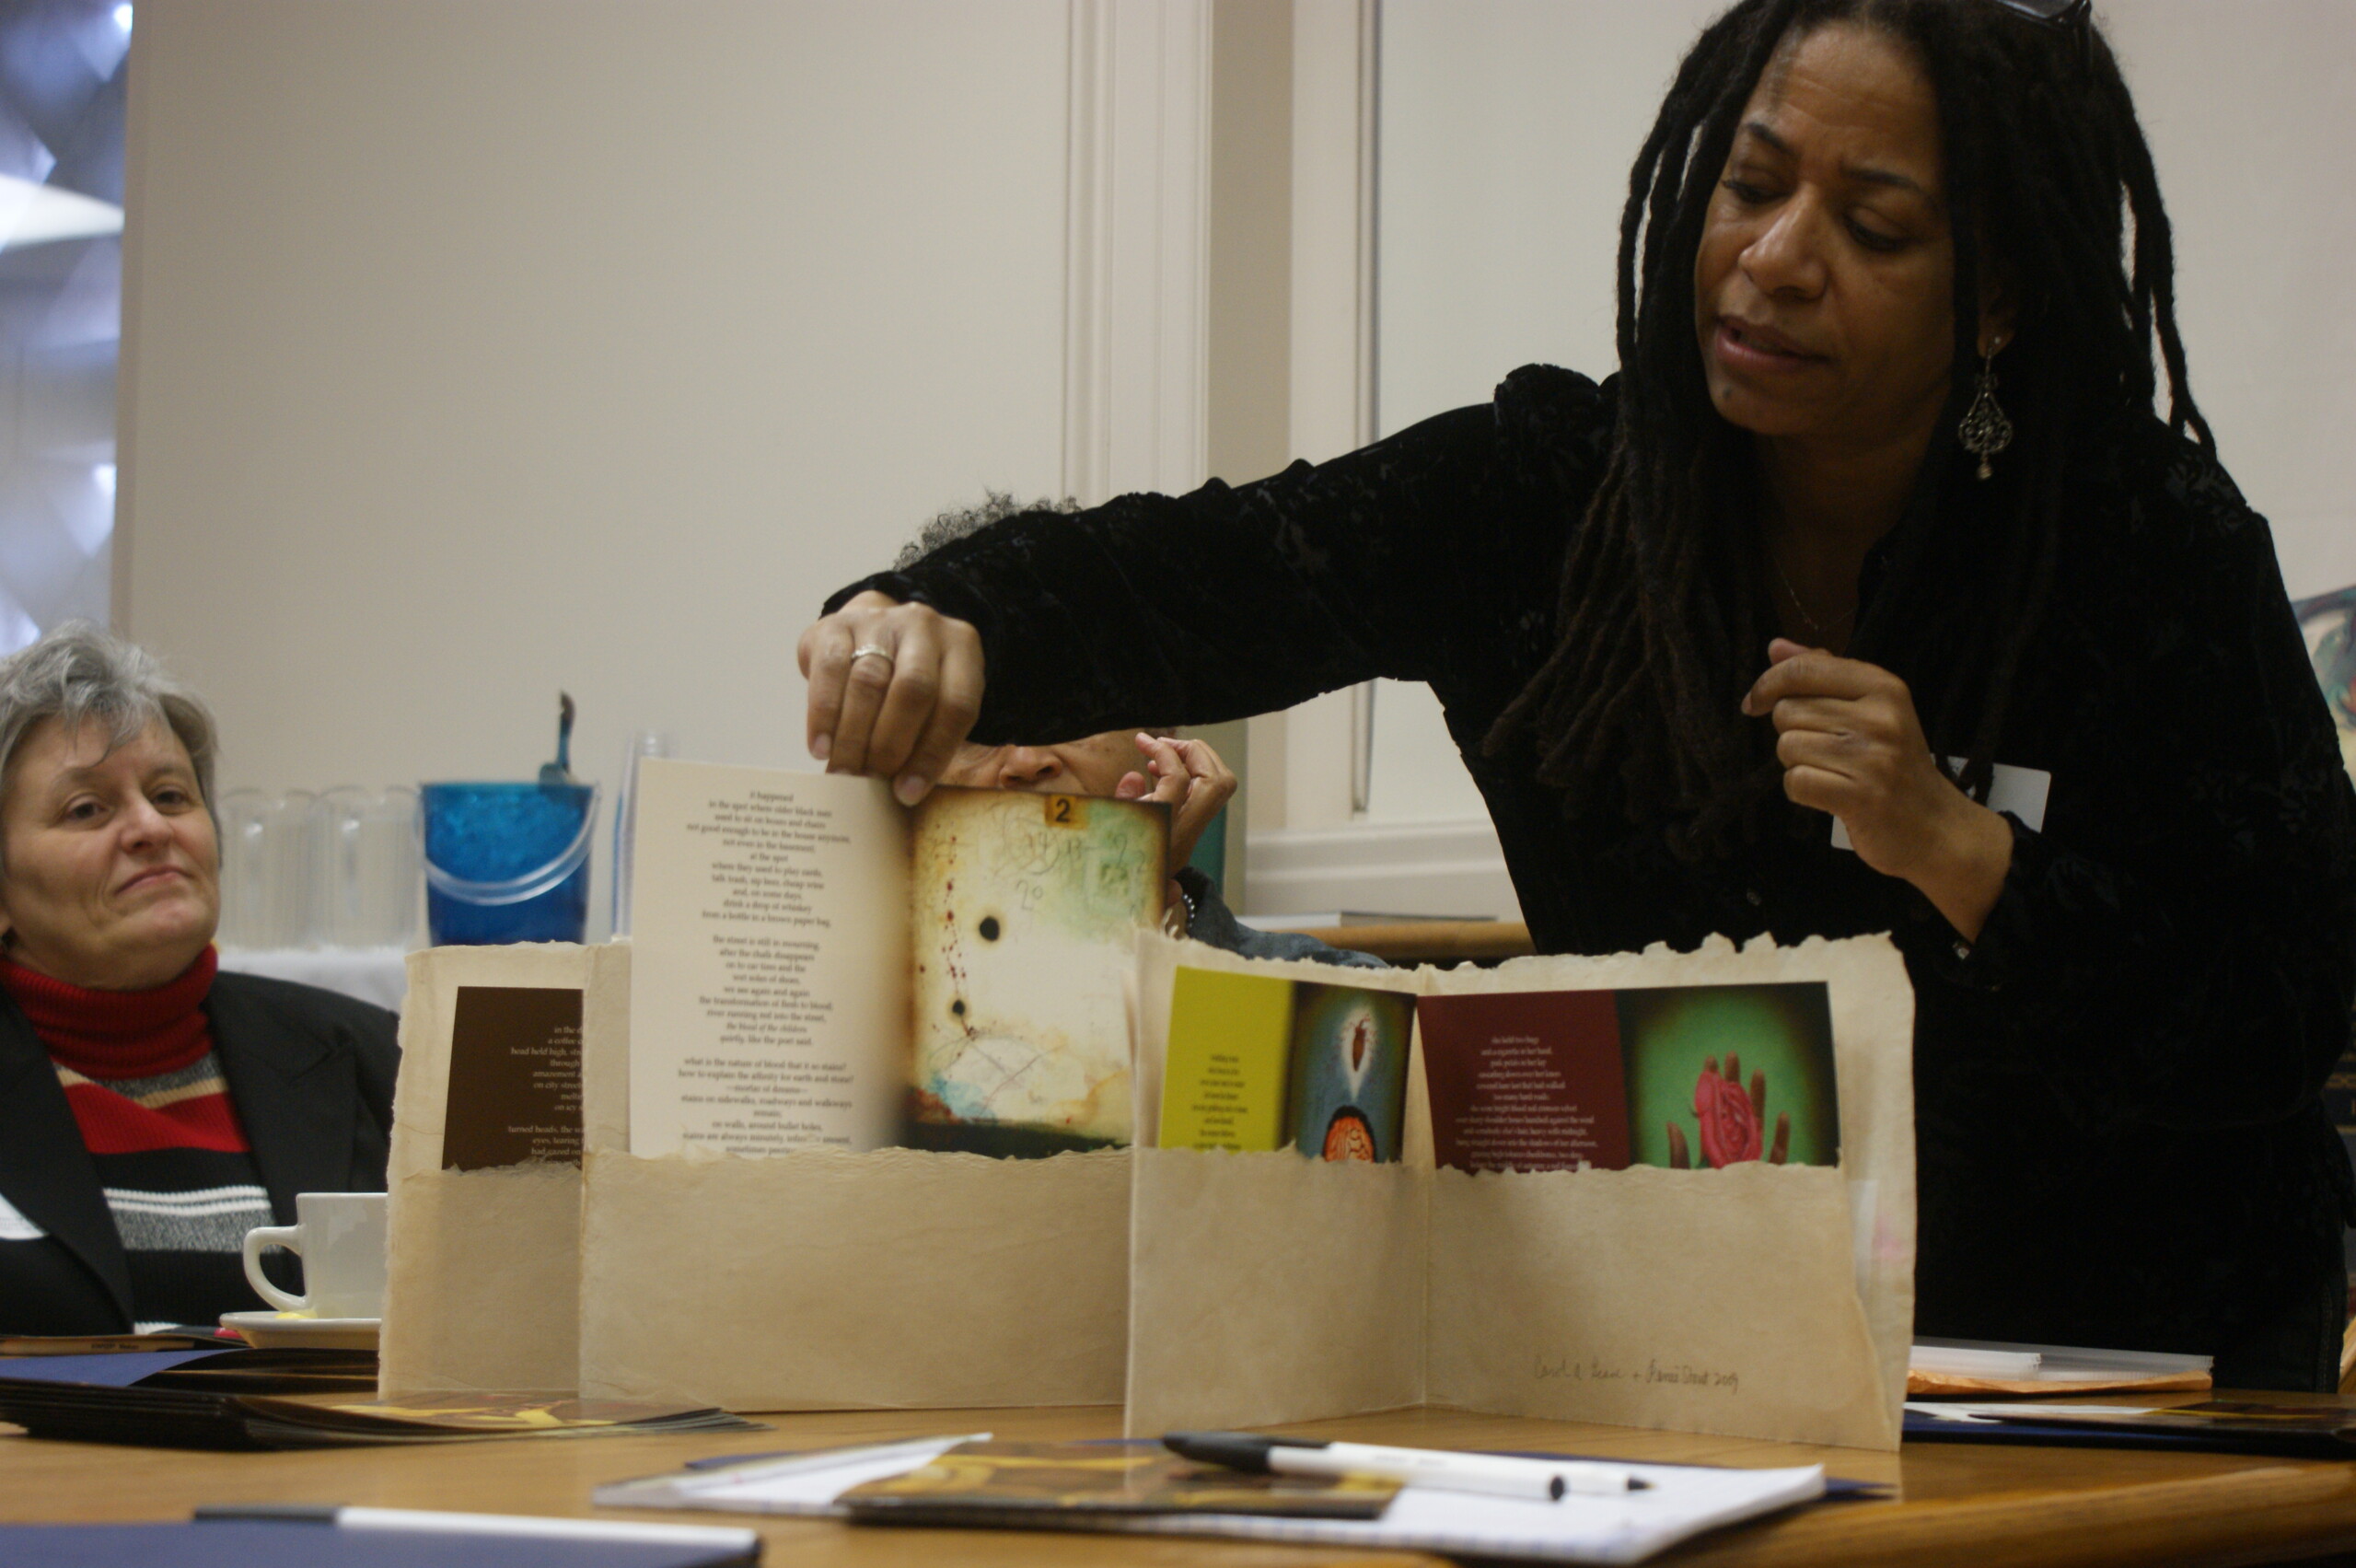 A dark-skinned woman with black dreadlocks and wearing a black sweater leans over a table and holds up a print of an artwork accompanied by a poem. To the left, a seated light-skinned woman with gray hair looks on.